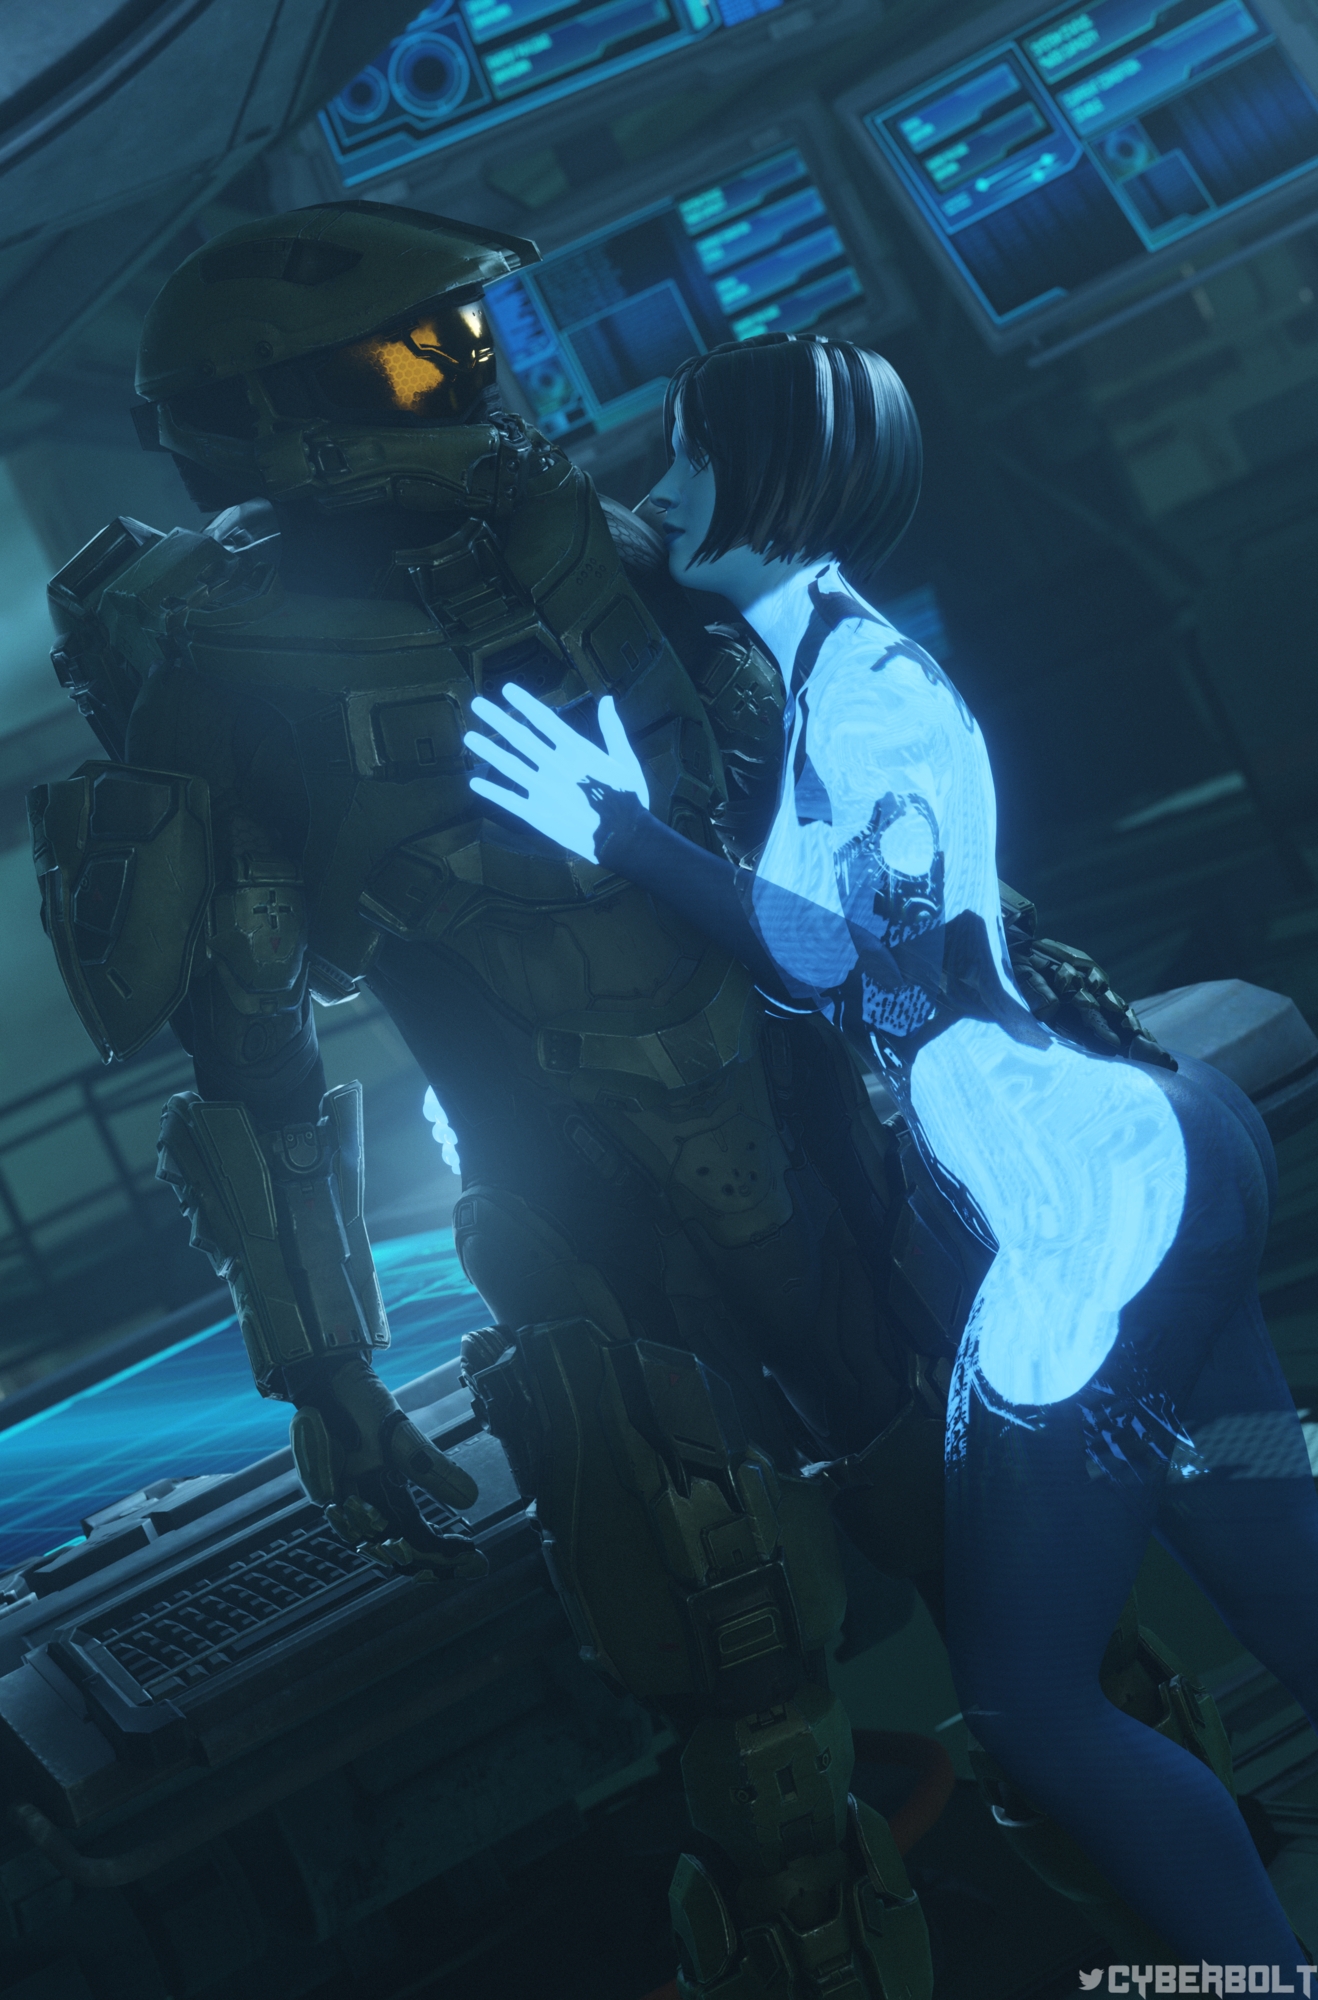 Halo 4 Master Chief and Cortana Alone Time Halo Halo 4 Master Chief Cortana 1boy1girl Blowjob Missionary Big Tits Big Breasts Big Ass Thicc Thighs Thick